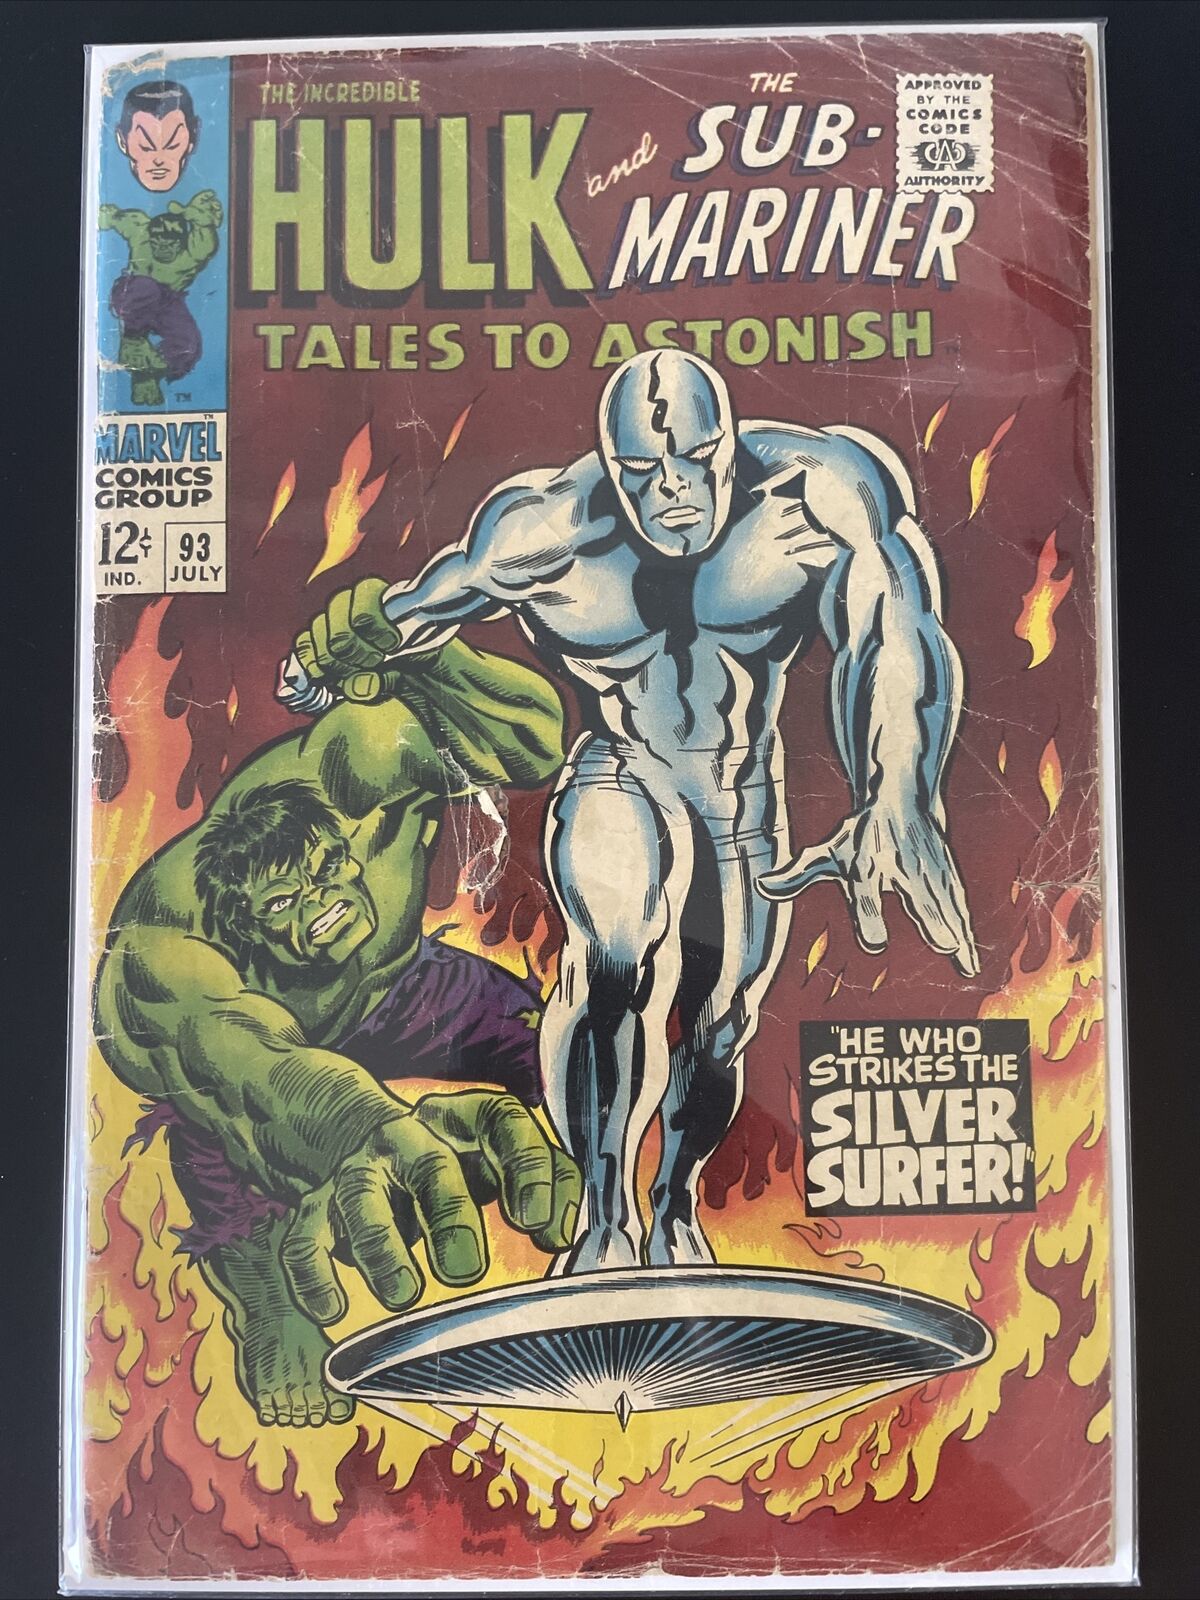 Tales To Astonish #93 (Marvel) Iconic Silver Surfer/Hulk Cover Marie Severin